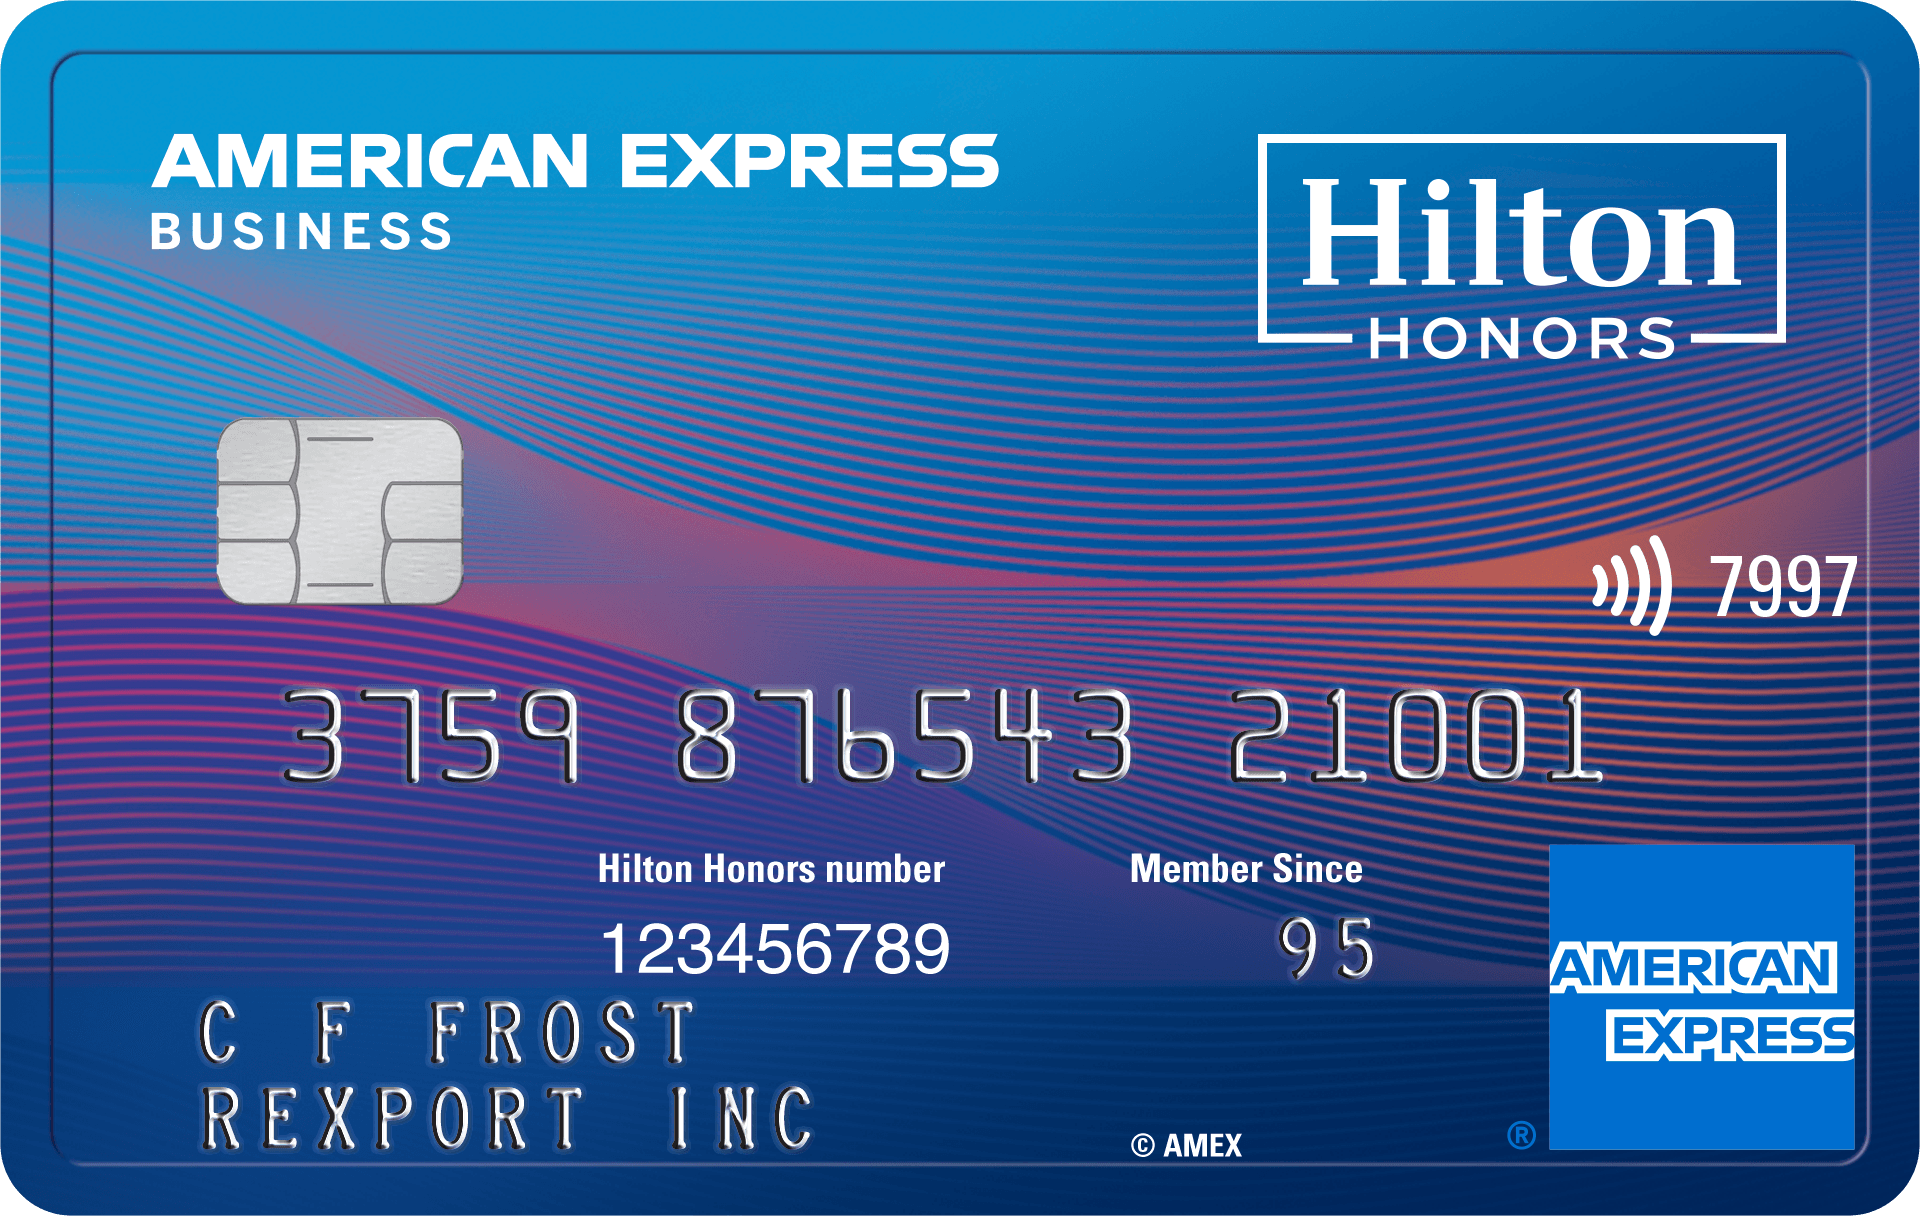 Hilton Honors Business card, chip enabled, features contactless tap to pay